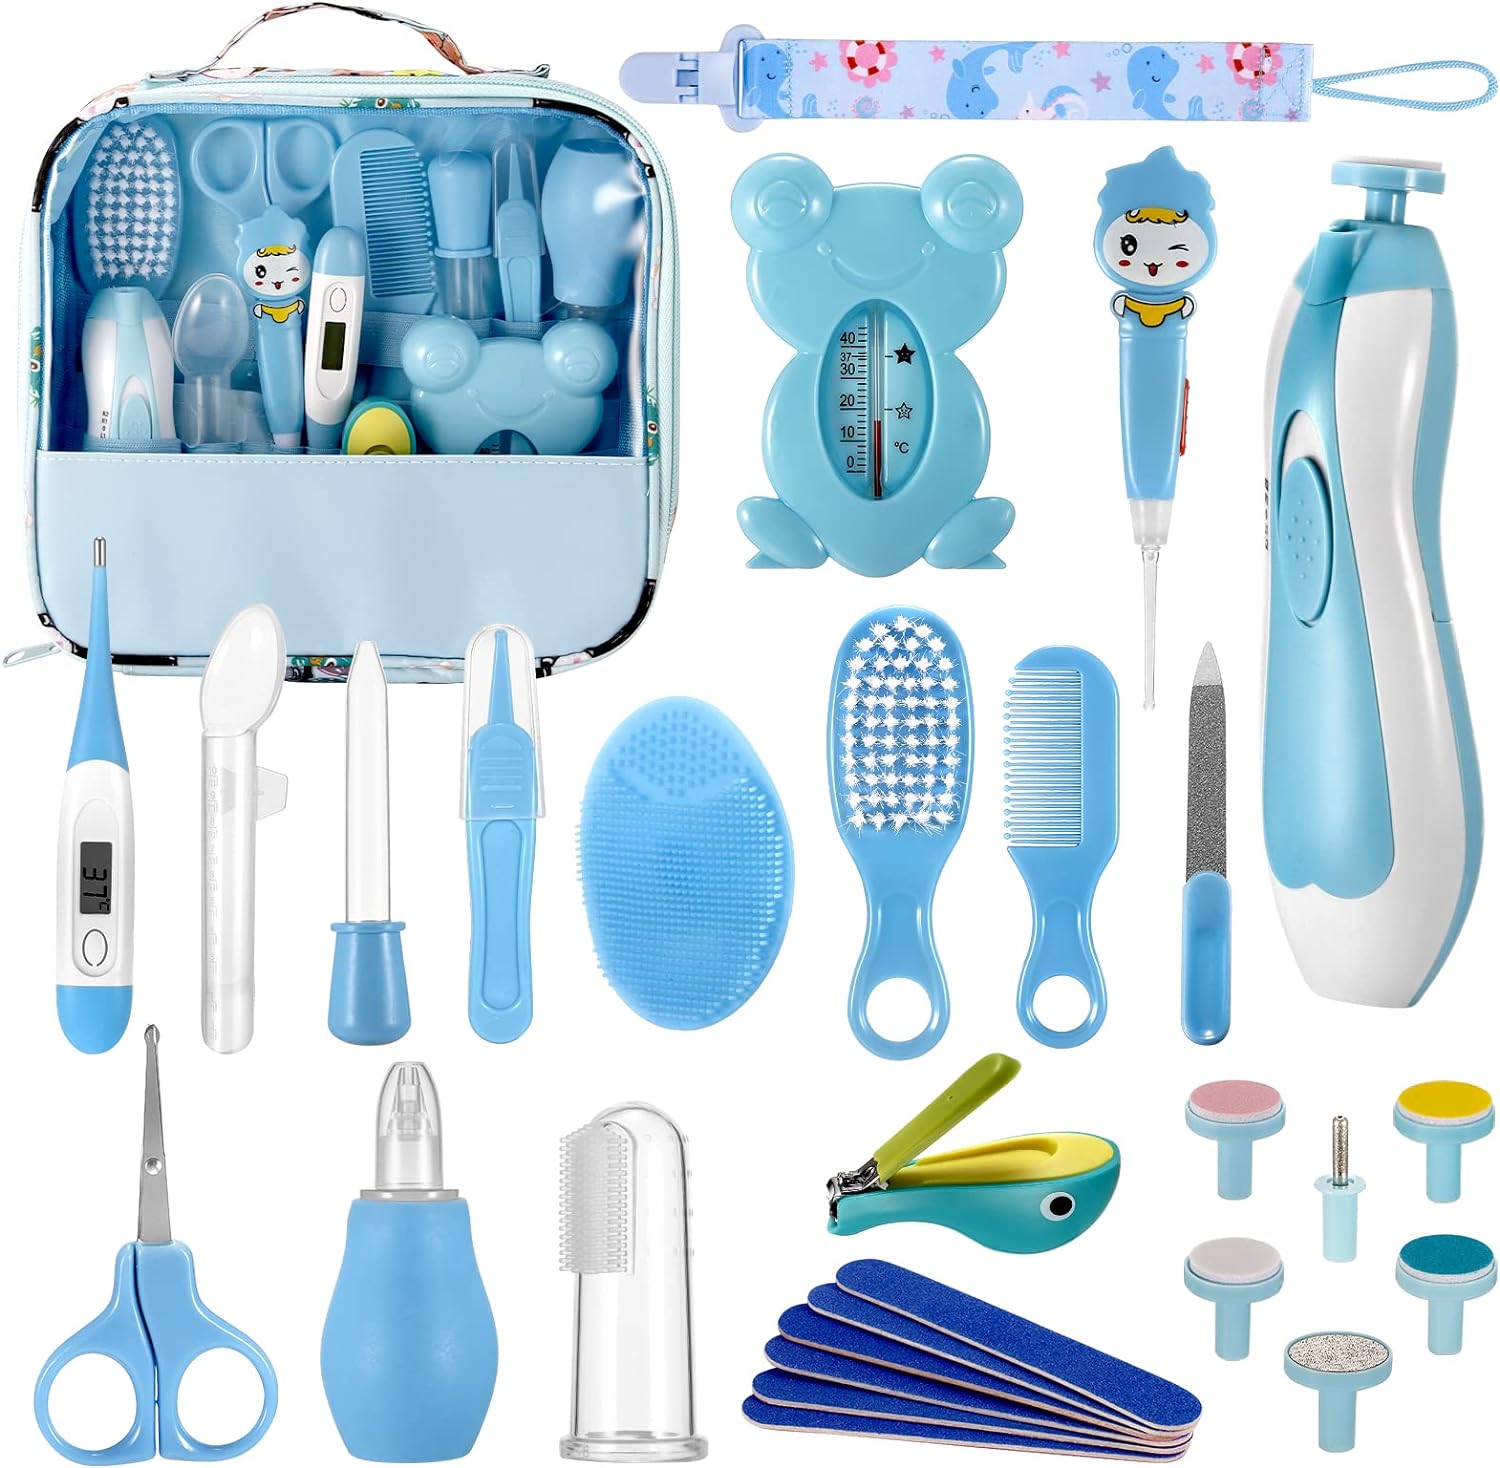 Baby Grooming Kit, 29 in 1 Portable Baby Safety Care Set and Baby Electric Nail Trimmer Set, Newborn Nursery Cleaner Essentials Health Care Set for Infant Toddlers Boys Girls, Baby Care Gift.